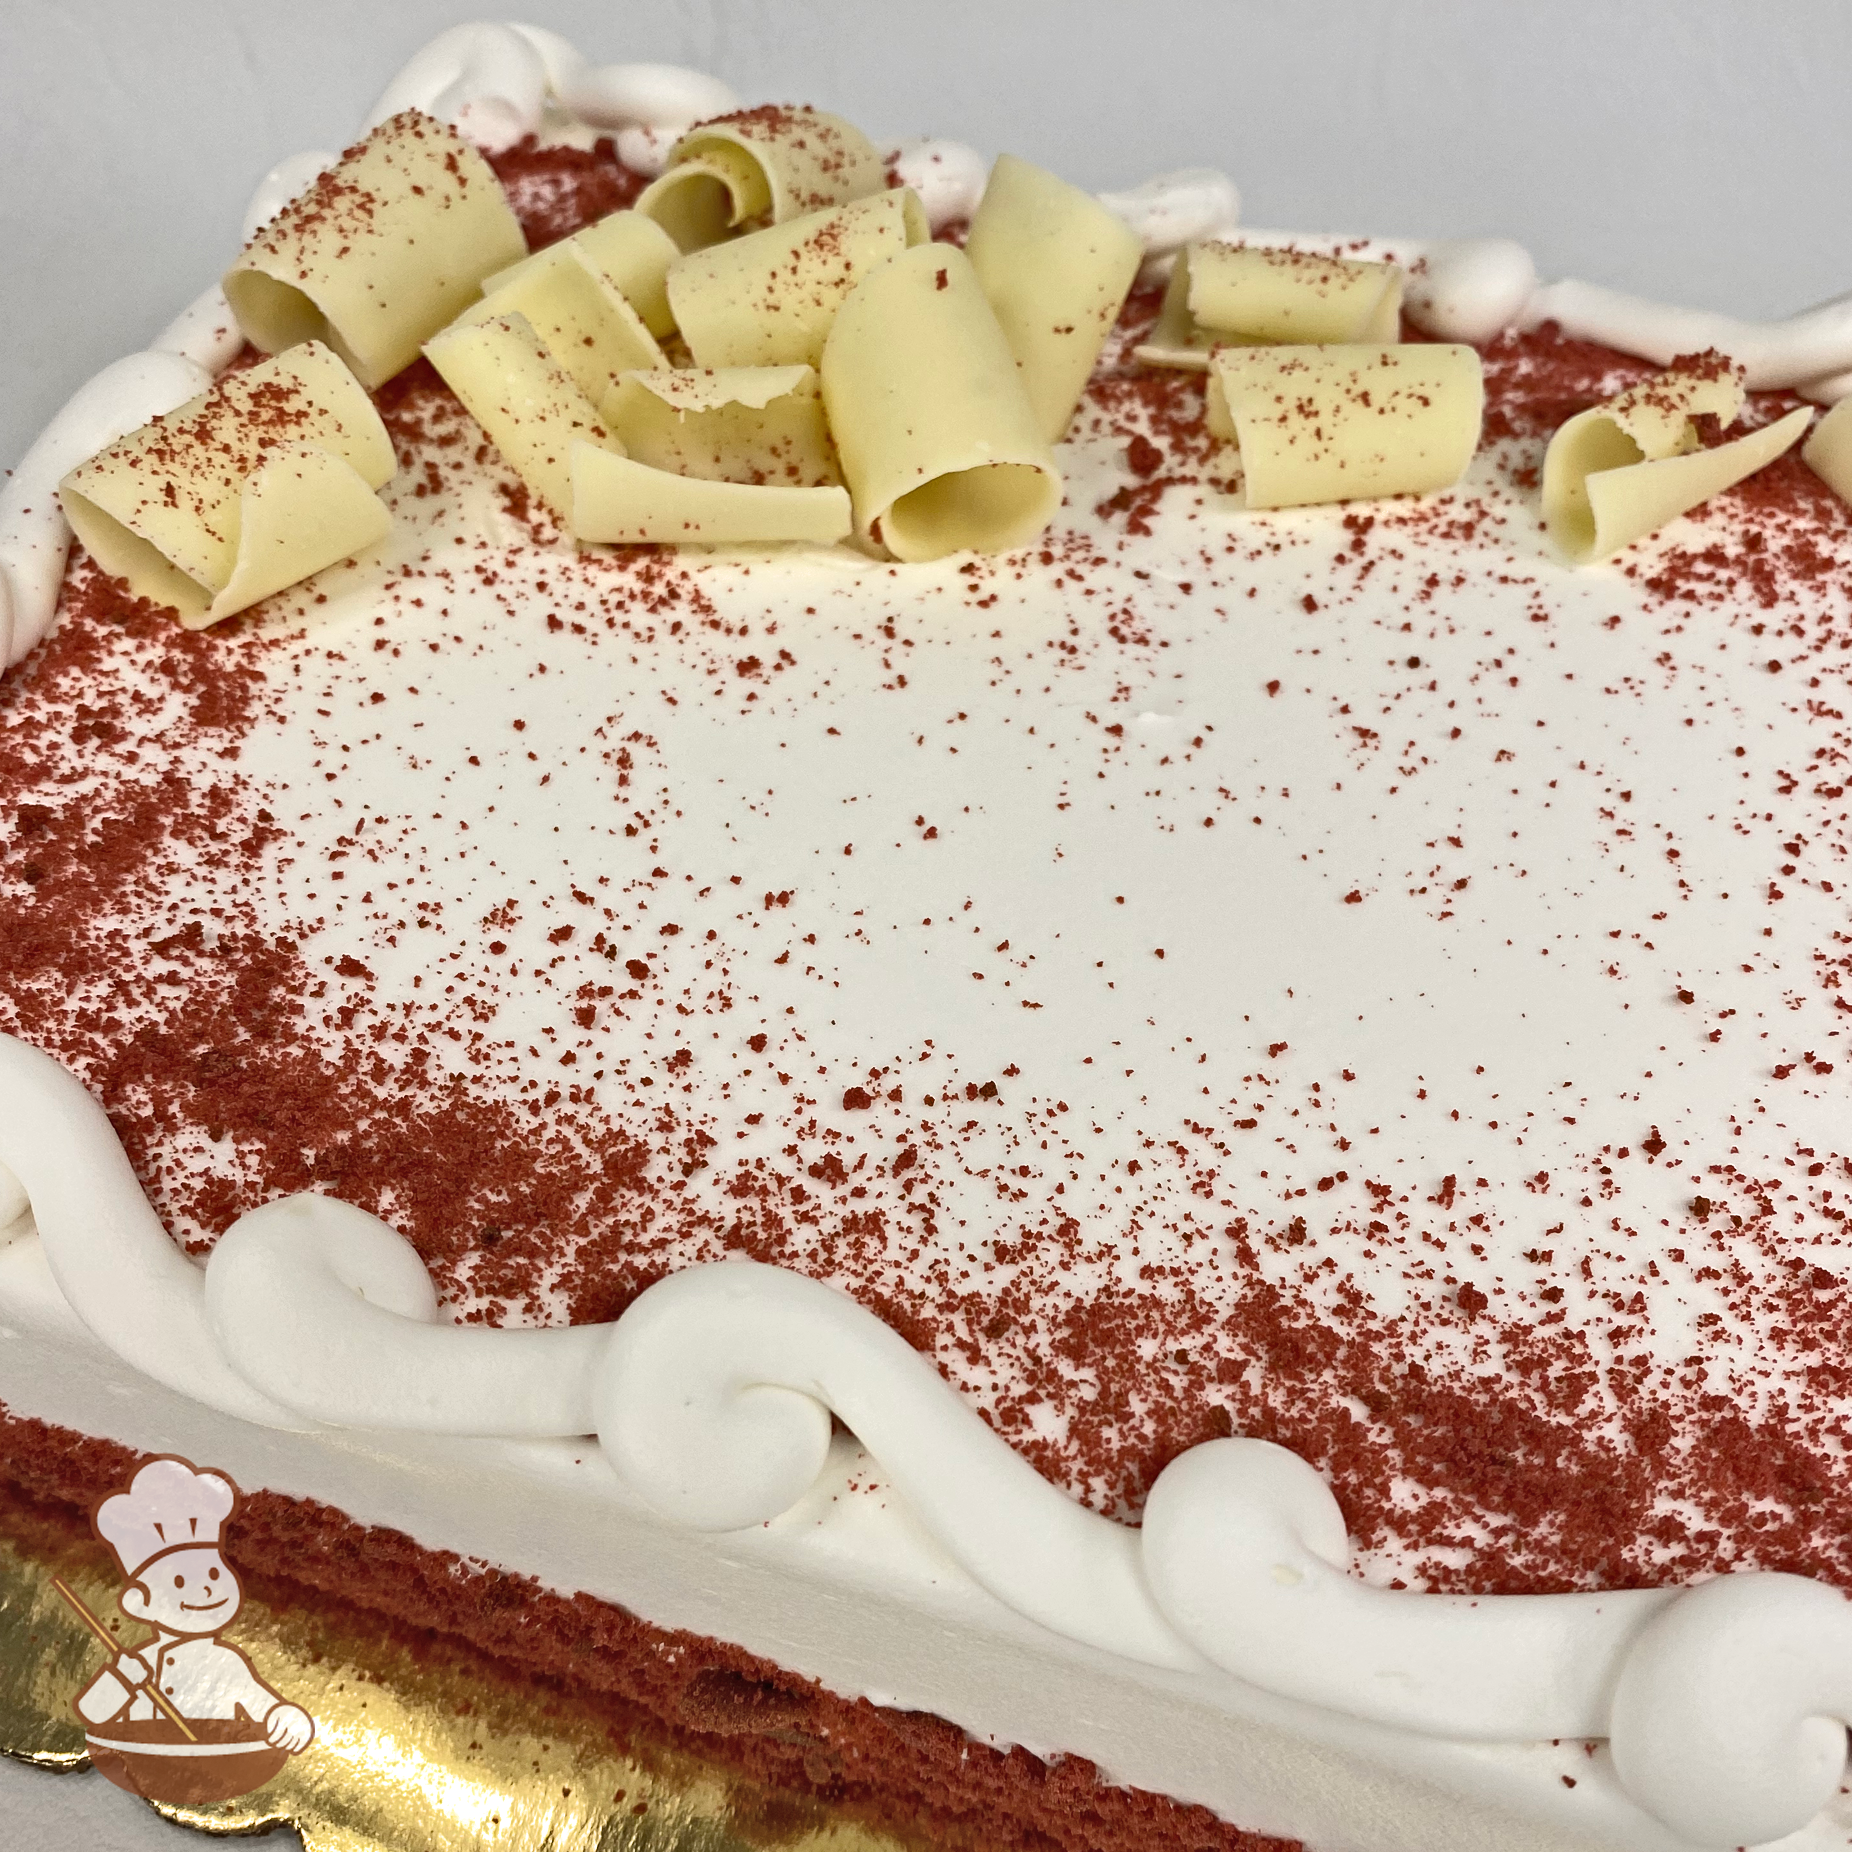 Sheet cake with red velvet cake crumbles and white chocolate curls.